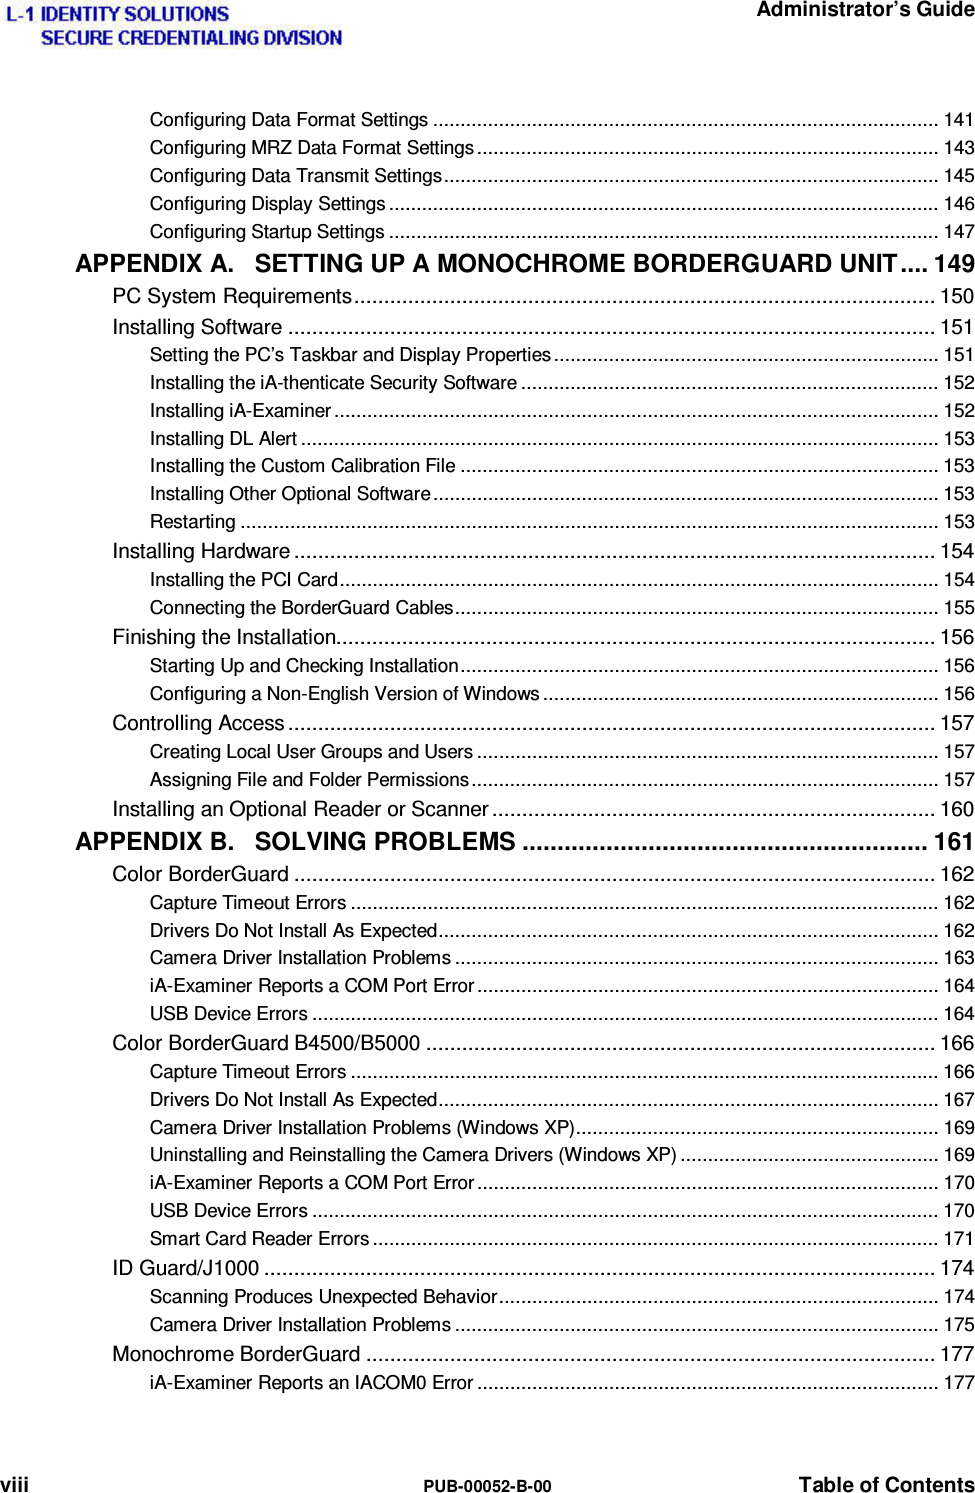   Administrator’s Guide viii  PUB-00052-B-00  Table of Contents Configuring Data Format Settings ............................................................................................ 141 Configuring MRZ Data Format Settings .................................................................................... 143 Configuring Data Transmit Settings .......................................................................................... 145 Configuring Display Settings .................................................................................................... 146 Configuring Startup Settings .................................................................................................... 147 APPENDIX A. SETTING UP A MONOCHROME BORDERGUARD UNIT .... 149 PC System Requirements ................................................................................................. 150 Installing Software ............................................................................................................ 151 Setting the PC’s Taskbar and Display Properties ...................................................................... 151 Installing the iA-thenticate Security Software ............................................................................ 152 Installing iA-Examiner .............................................................................................................. 152 Installing DL Alert .................................................................................................................... 153 Installing the Custom Calibration File ....................................................................................... 153 Installing Other Optional Software ............................................................................................ 153 Restarting ............................................................................................................................... 153 Installing Hardware ........................................................................................................... 154 Installing the PCI Card ............................................................................................................. 154 Connecting the BorderGuard Cables ........................................................................................ 155 Finishing the Installation.................................................................................................... 156 Starting Up and Checking Installation ....................................................................................... 156 Configuring a Non-English Version of Windows ........................................................................ 156 Controlling Access ............................................................................................................ 157 Creating Local User Groups and Users .................................................................................... 157 Assigning File and Folder Permissions ..................................................................................... 157 Installing an Optional Reader or Scanner .......................................................................... 160 APPENDIX B. SOLVING PROBLEMS .......................................................... 161 Color BorderGuard ........................................................................................................... 162 Capture Timeout Errors ........................................................................................................... 162 Drivers Do Not Install As Expected ........................................................................................... 162 Camera Driver Installation Problems ........................................................................................ 163 iA-Examiner Reports a COM Port Error .................................................................................... 164 USB Device Errors .................................................................................................................. 164 Color BorderGuard B4500/B5000 ..................................................................................... 166 Capture Timeout Errors ........................................................................................................... 166 Drivers Do Not Install As Expected ........................................................................................... 167 Camera Driver Installation Problems (Windows XP) .................................................................. 169 Uninstalling and Reinstalling the Camera Drivers (Windows XP) ............................................... 169 iA-Examiner Reports a COM Port Error .................................................................................... 170 USB Device Errors .................................................................................................................. 170 Smart Card Reader Errors ....................................................................................................... 171 ID Guard/J1000 ................................................................................................................ 174 Scanning Produces Unexpected Behavior ................................................................................ 174 Camera Driver Installation Problems ........................................................................................ 175 Monochrome BorderGuard ............................................................................................... 177 iA-Examiner Reports an IACOM0 Error .................................................................................... 177 